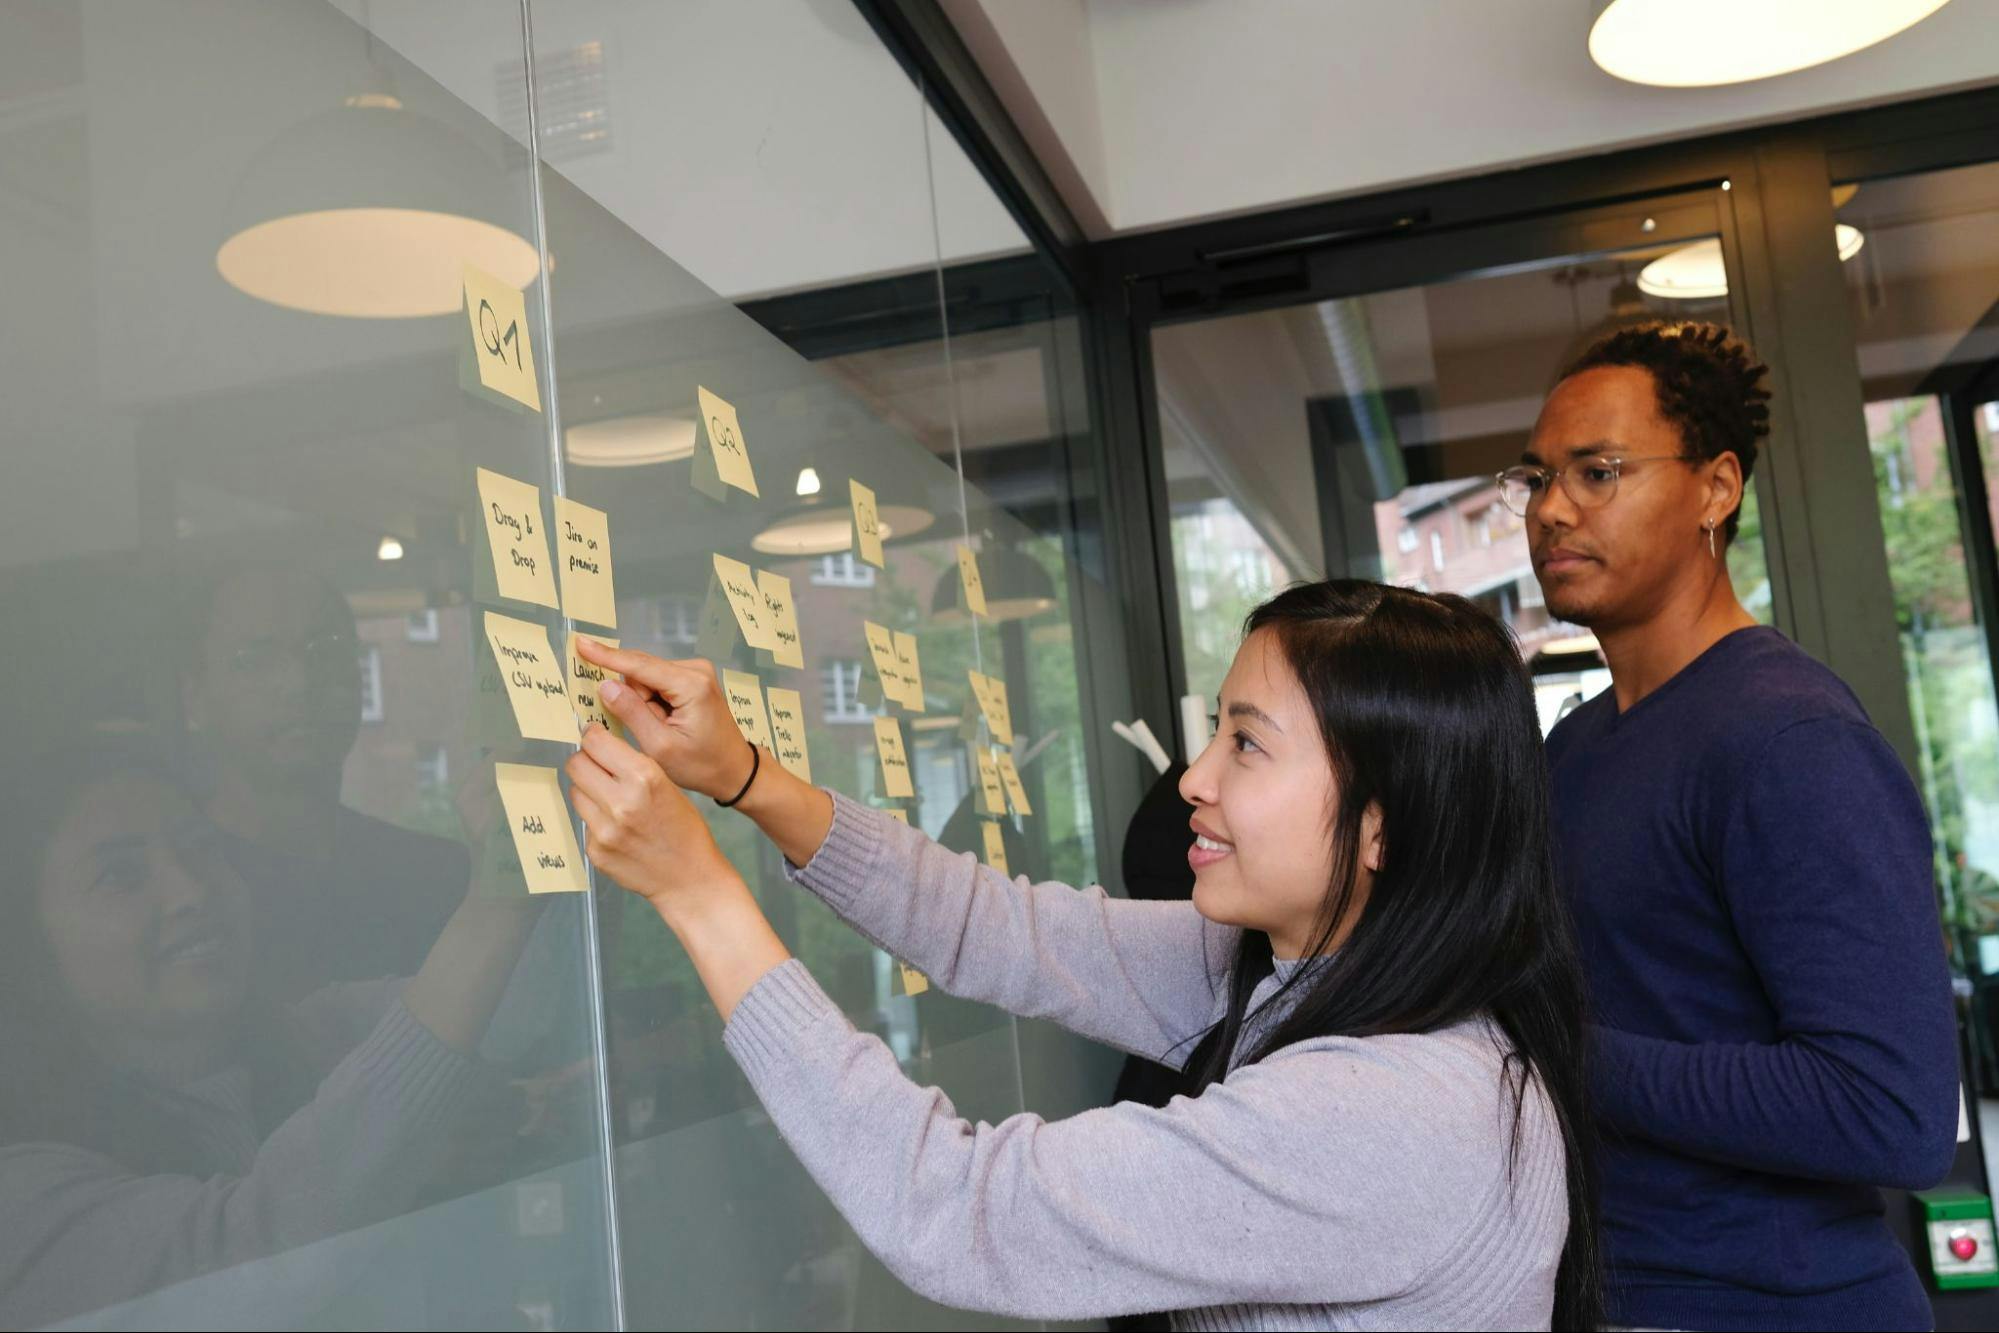 Employee Journey Mapping with sticky notes